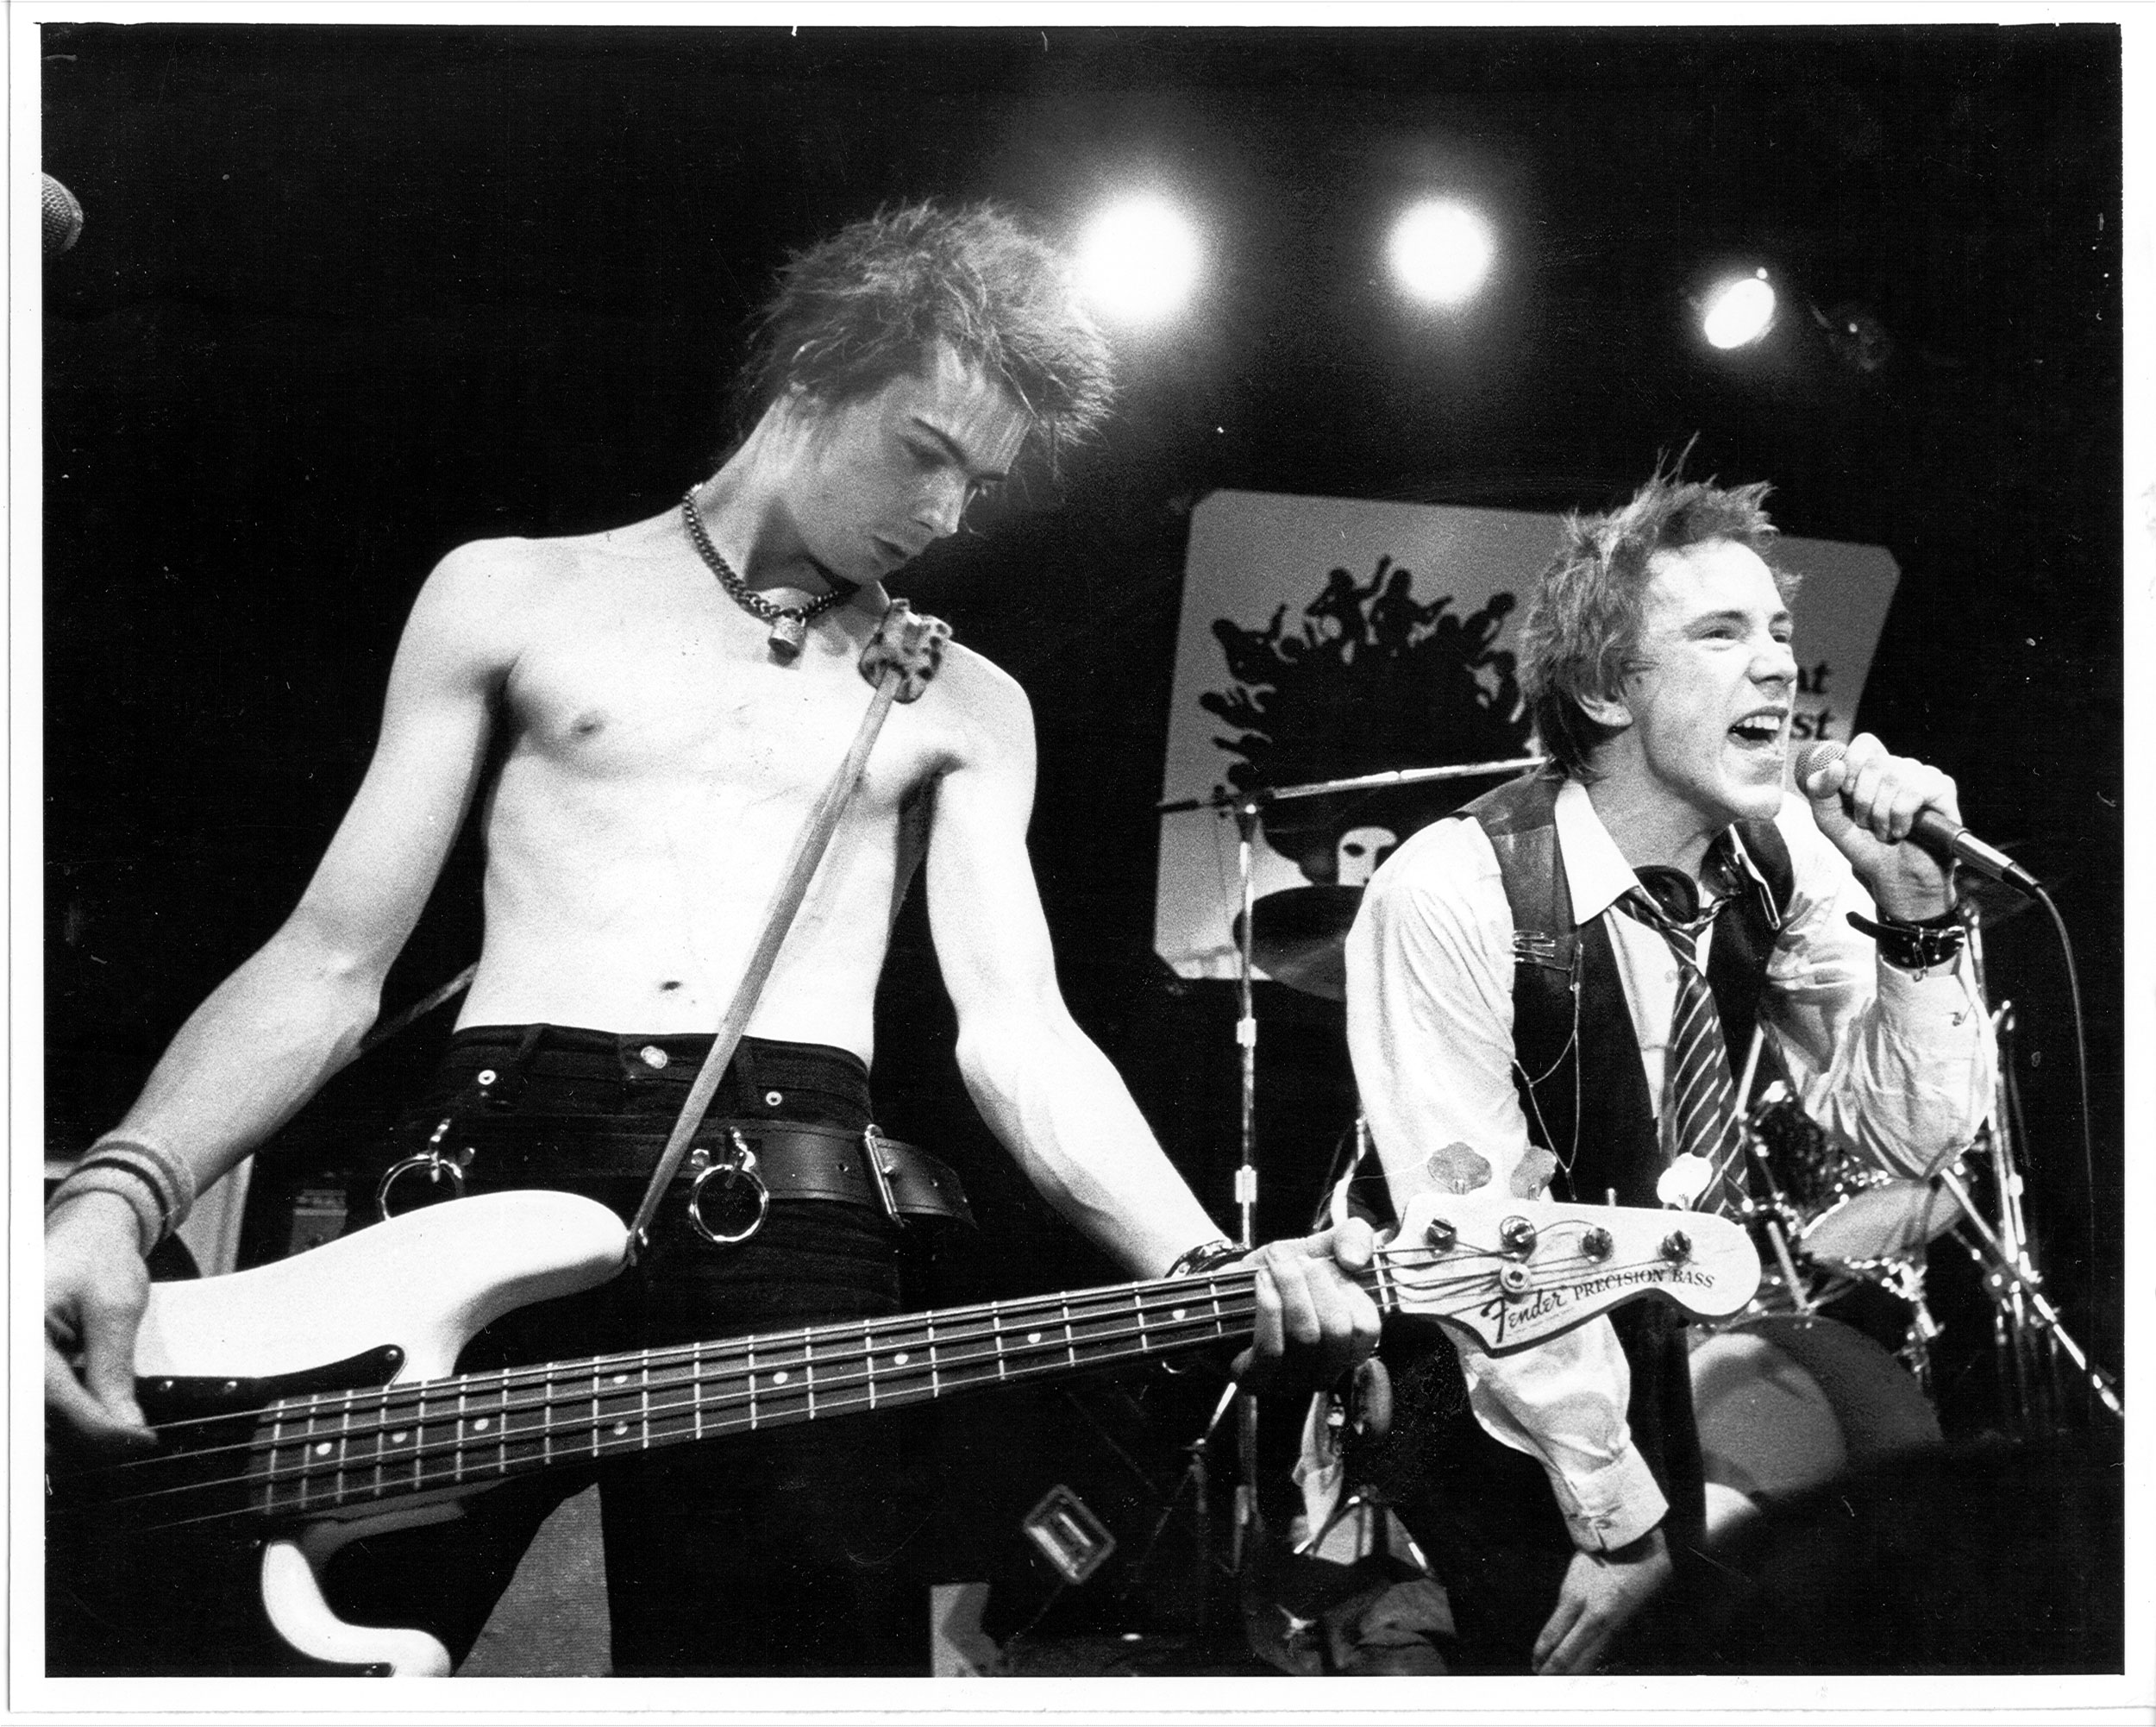 I decided to go with a shot of Sid Vicious in the forefront because he will always be my favorite Sex Pistol.